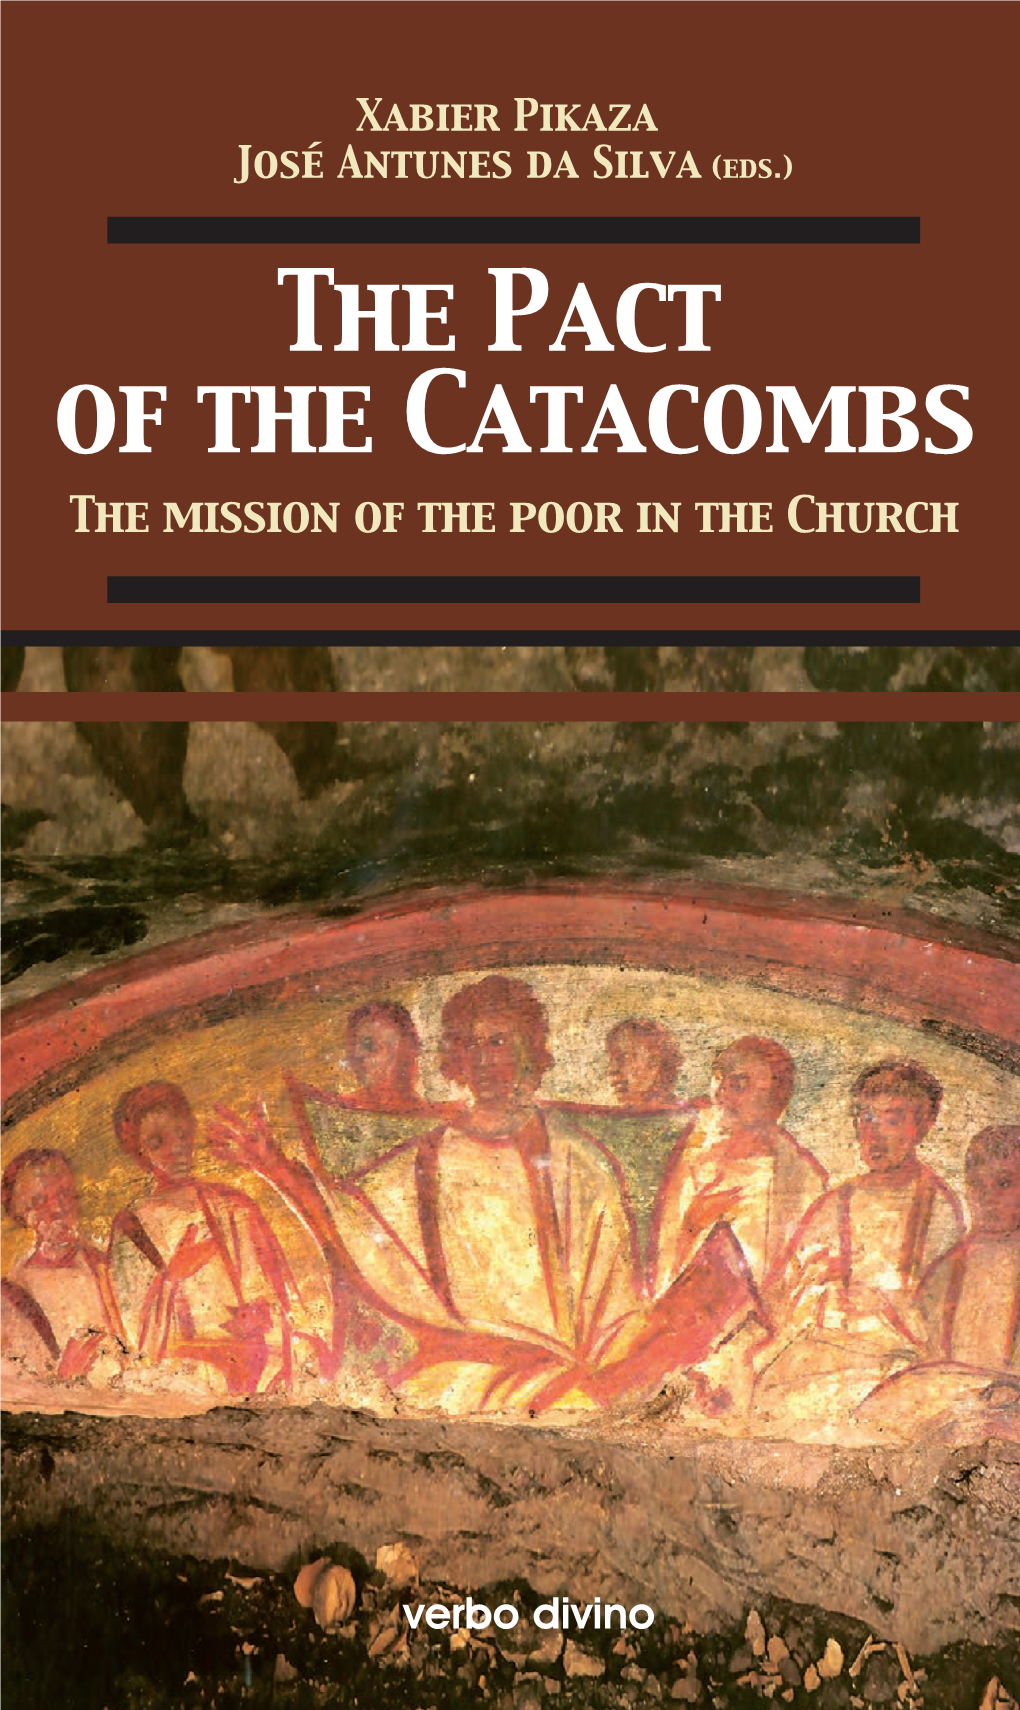 The Pact of the Catacombs.Pdf 1 22/9/15 13:23